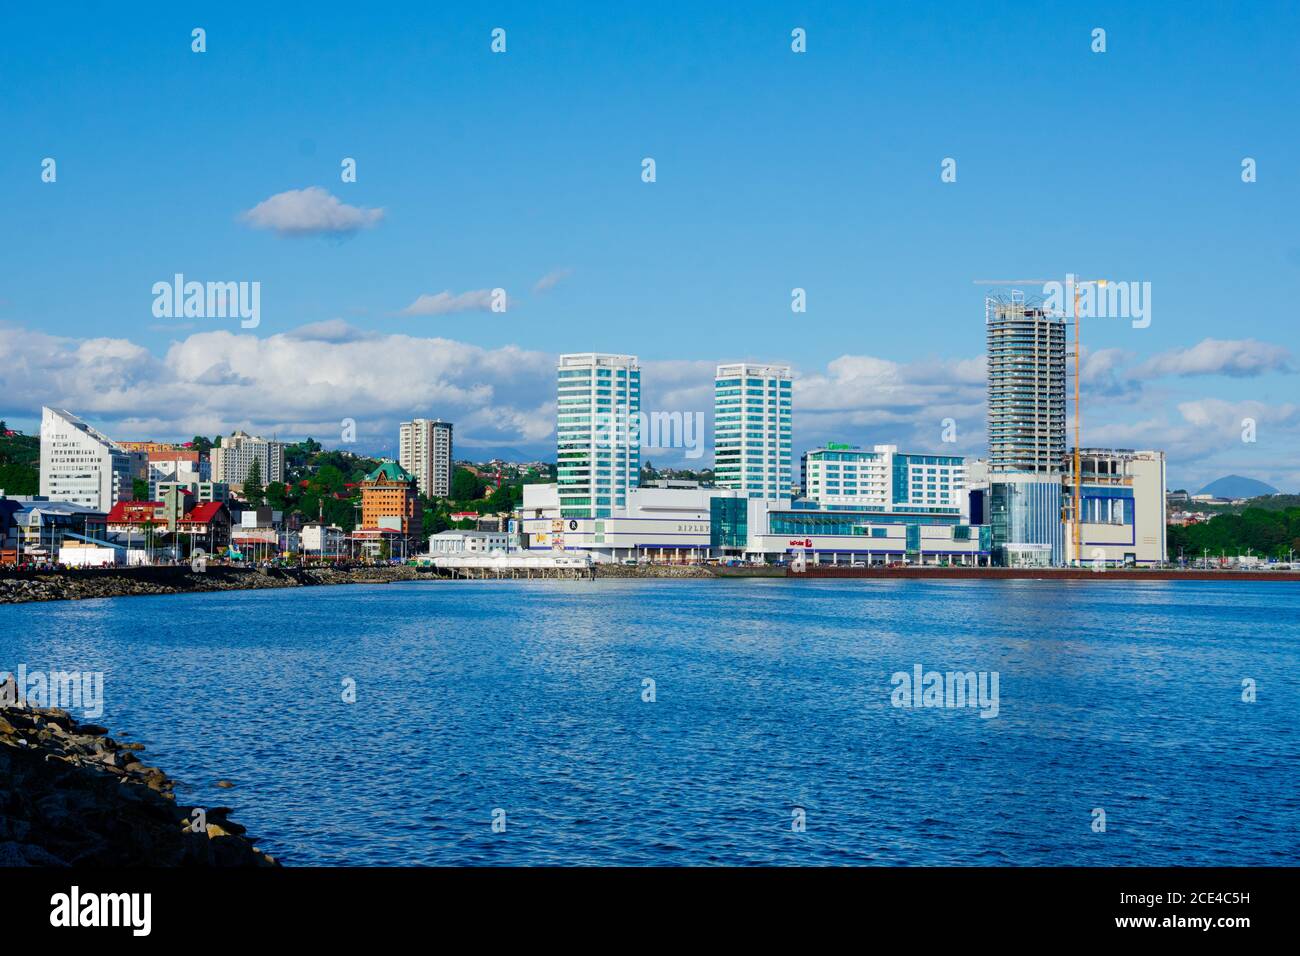 Puerto Montt, Chile. February 13, 2020. View of Puerto Montt waterfront and Paseo Costanera Mall Stock Photo